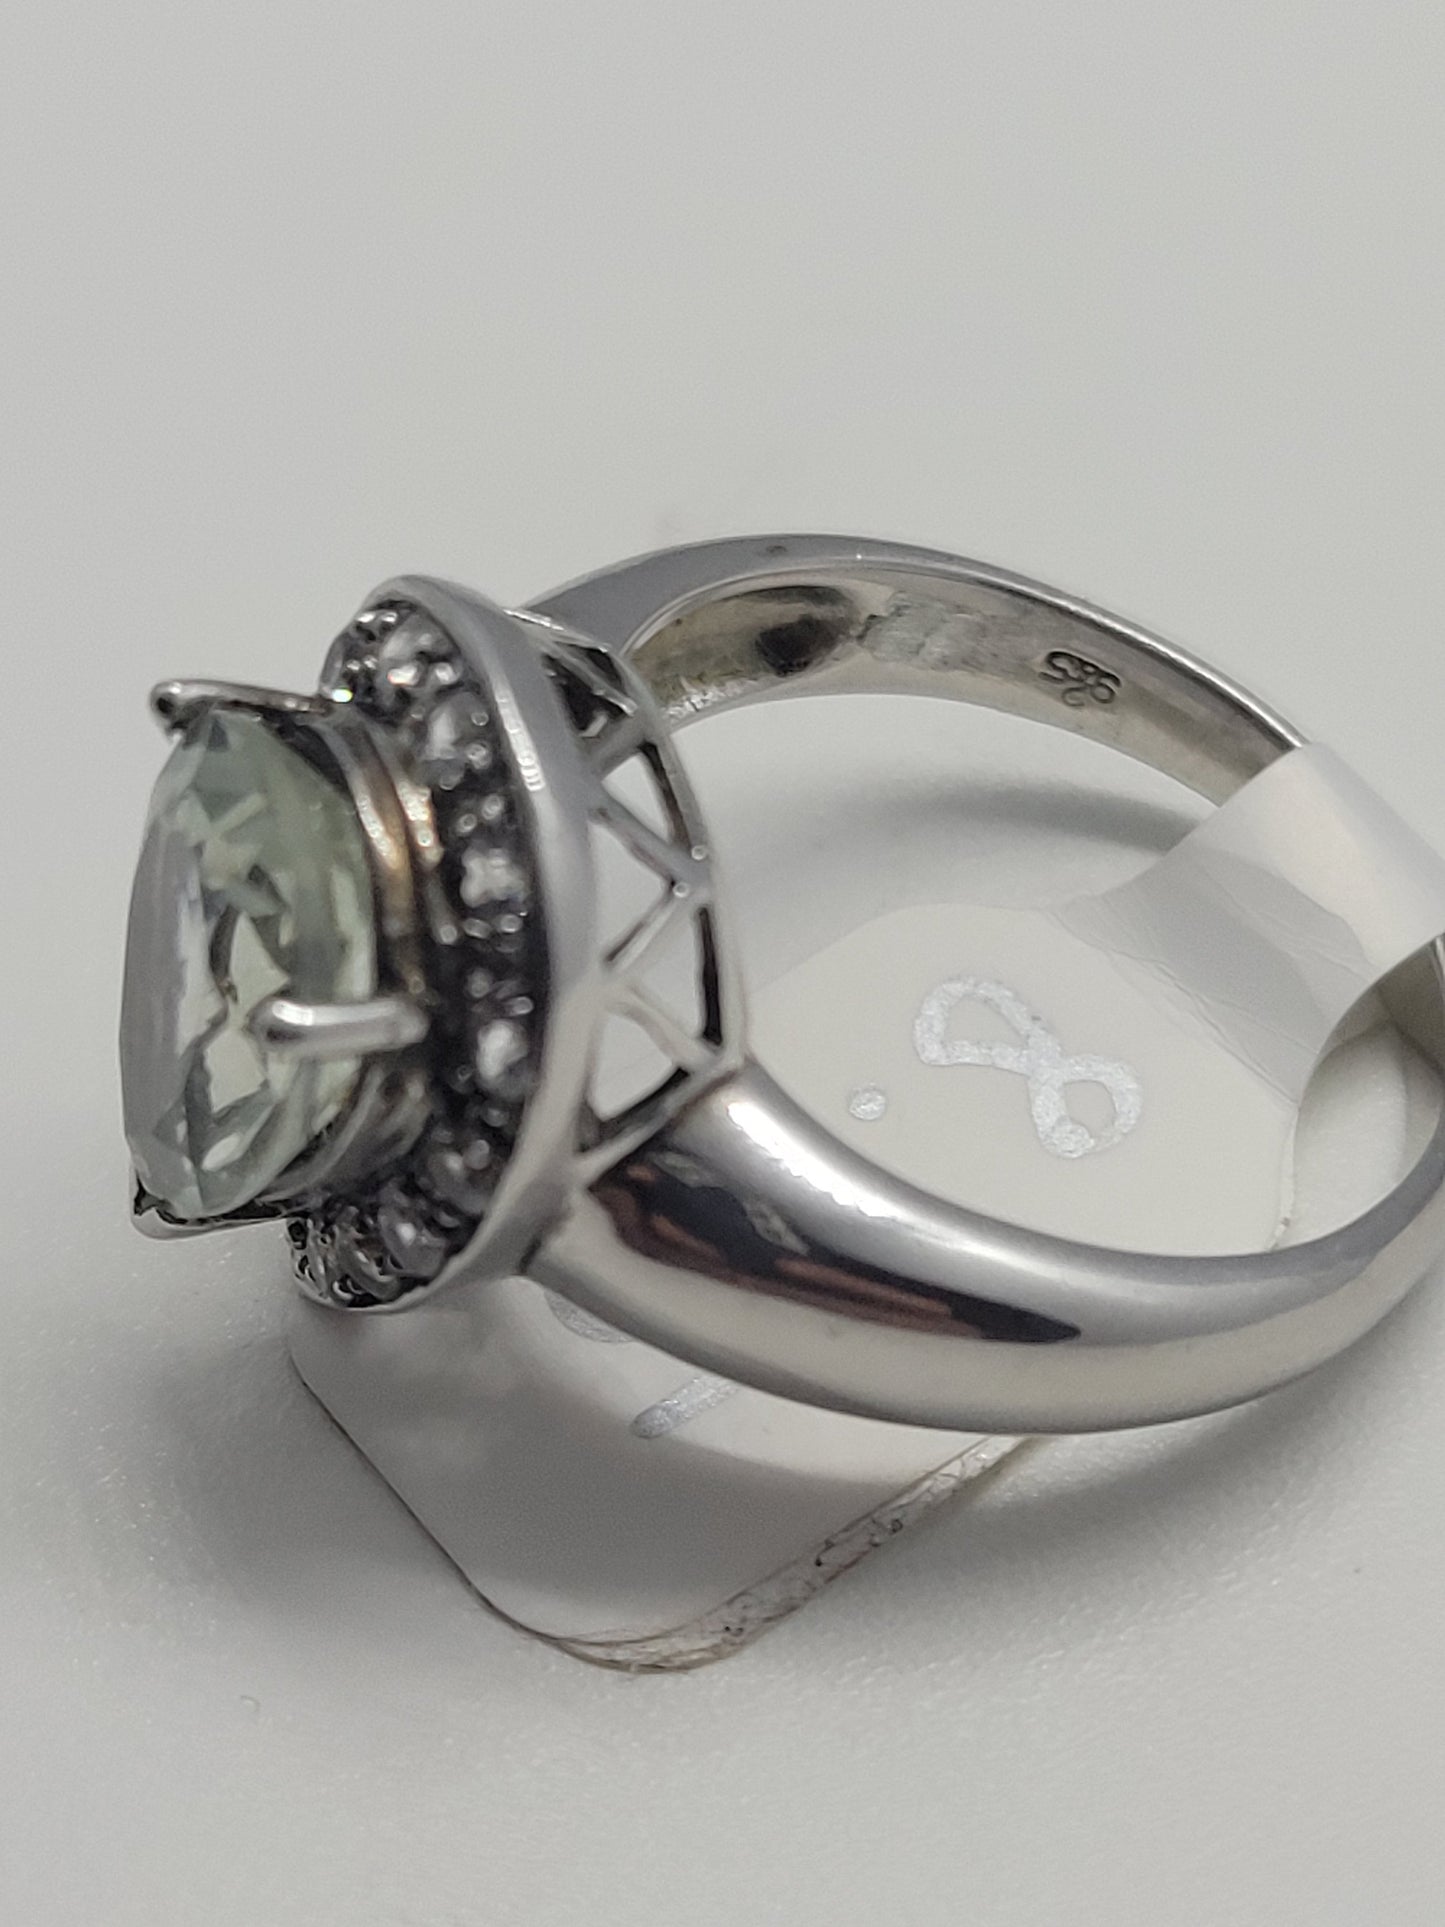 Vintage Smoky Quartz with White Topaz Ring in 925 Sterling Silver